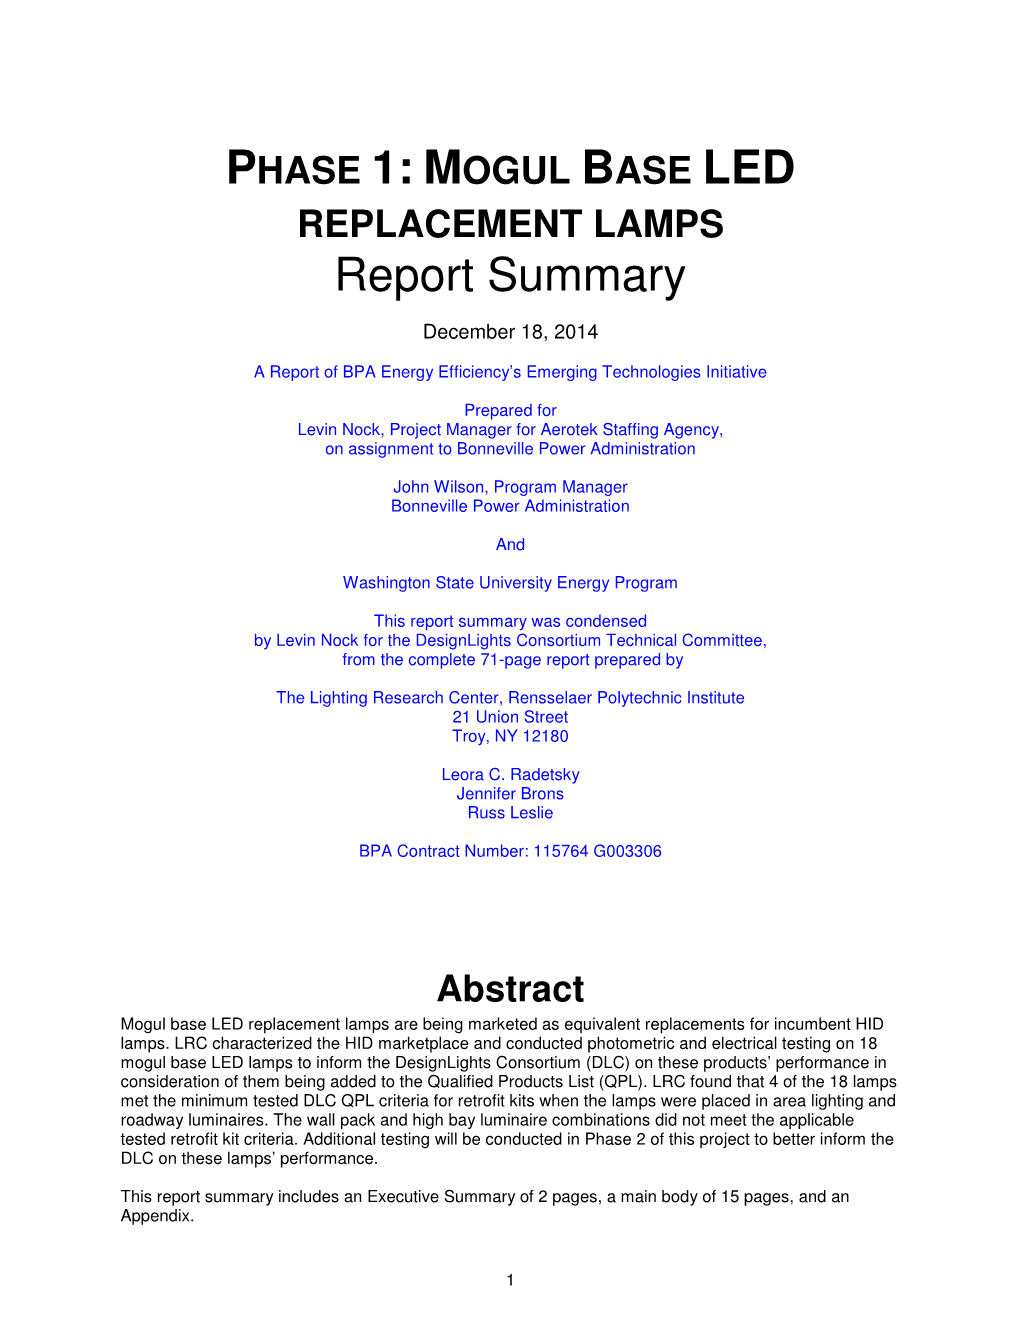 MOGUL BASE LED REPLACEMENT LAMPS Report Summary